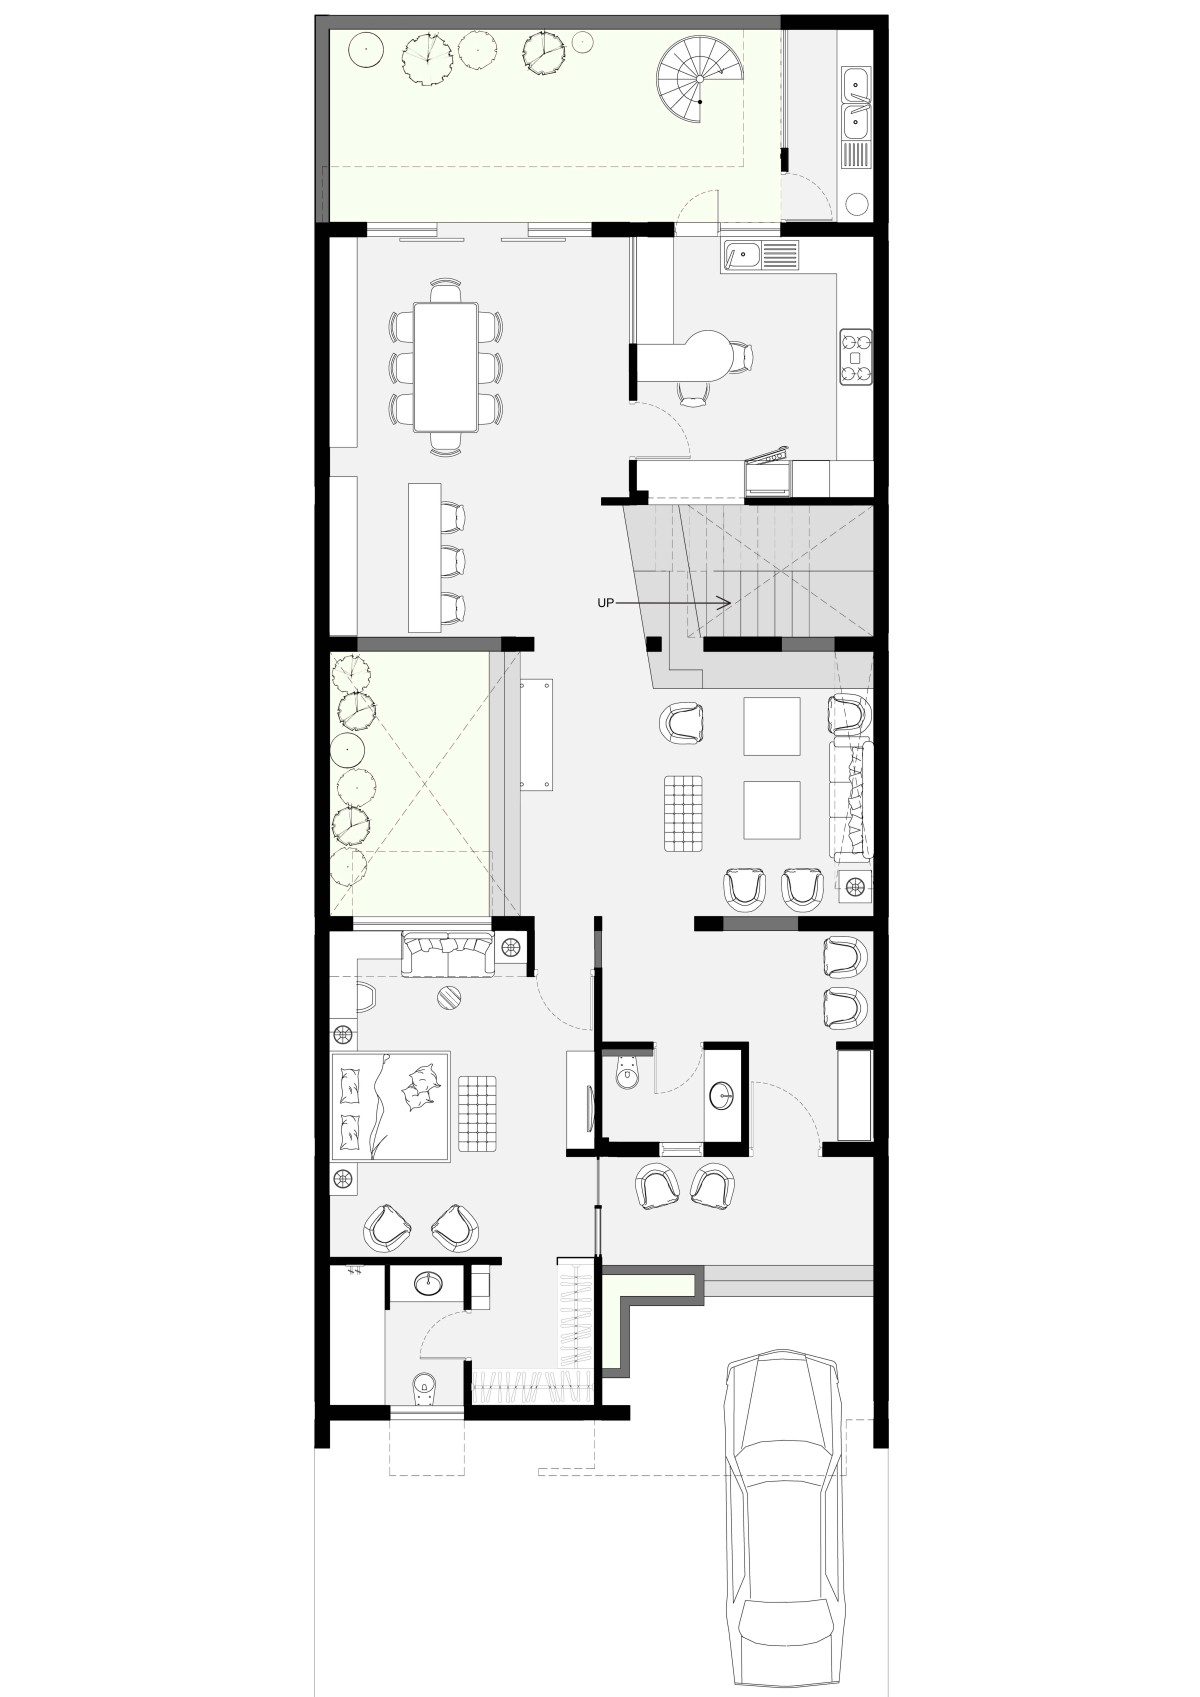 Ground Floor Plan of The Cucoon House by Forum Advaita